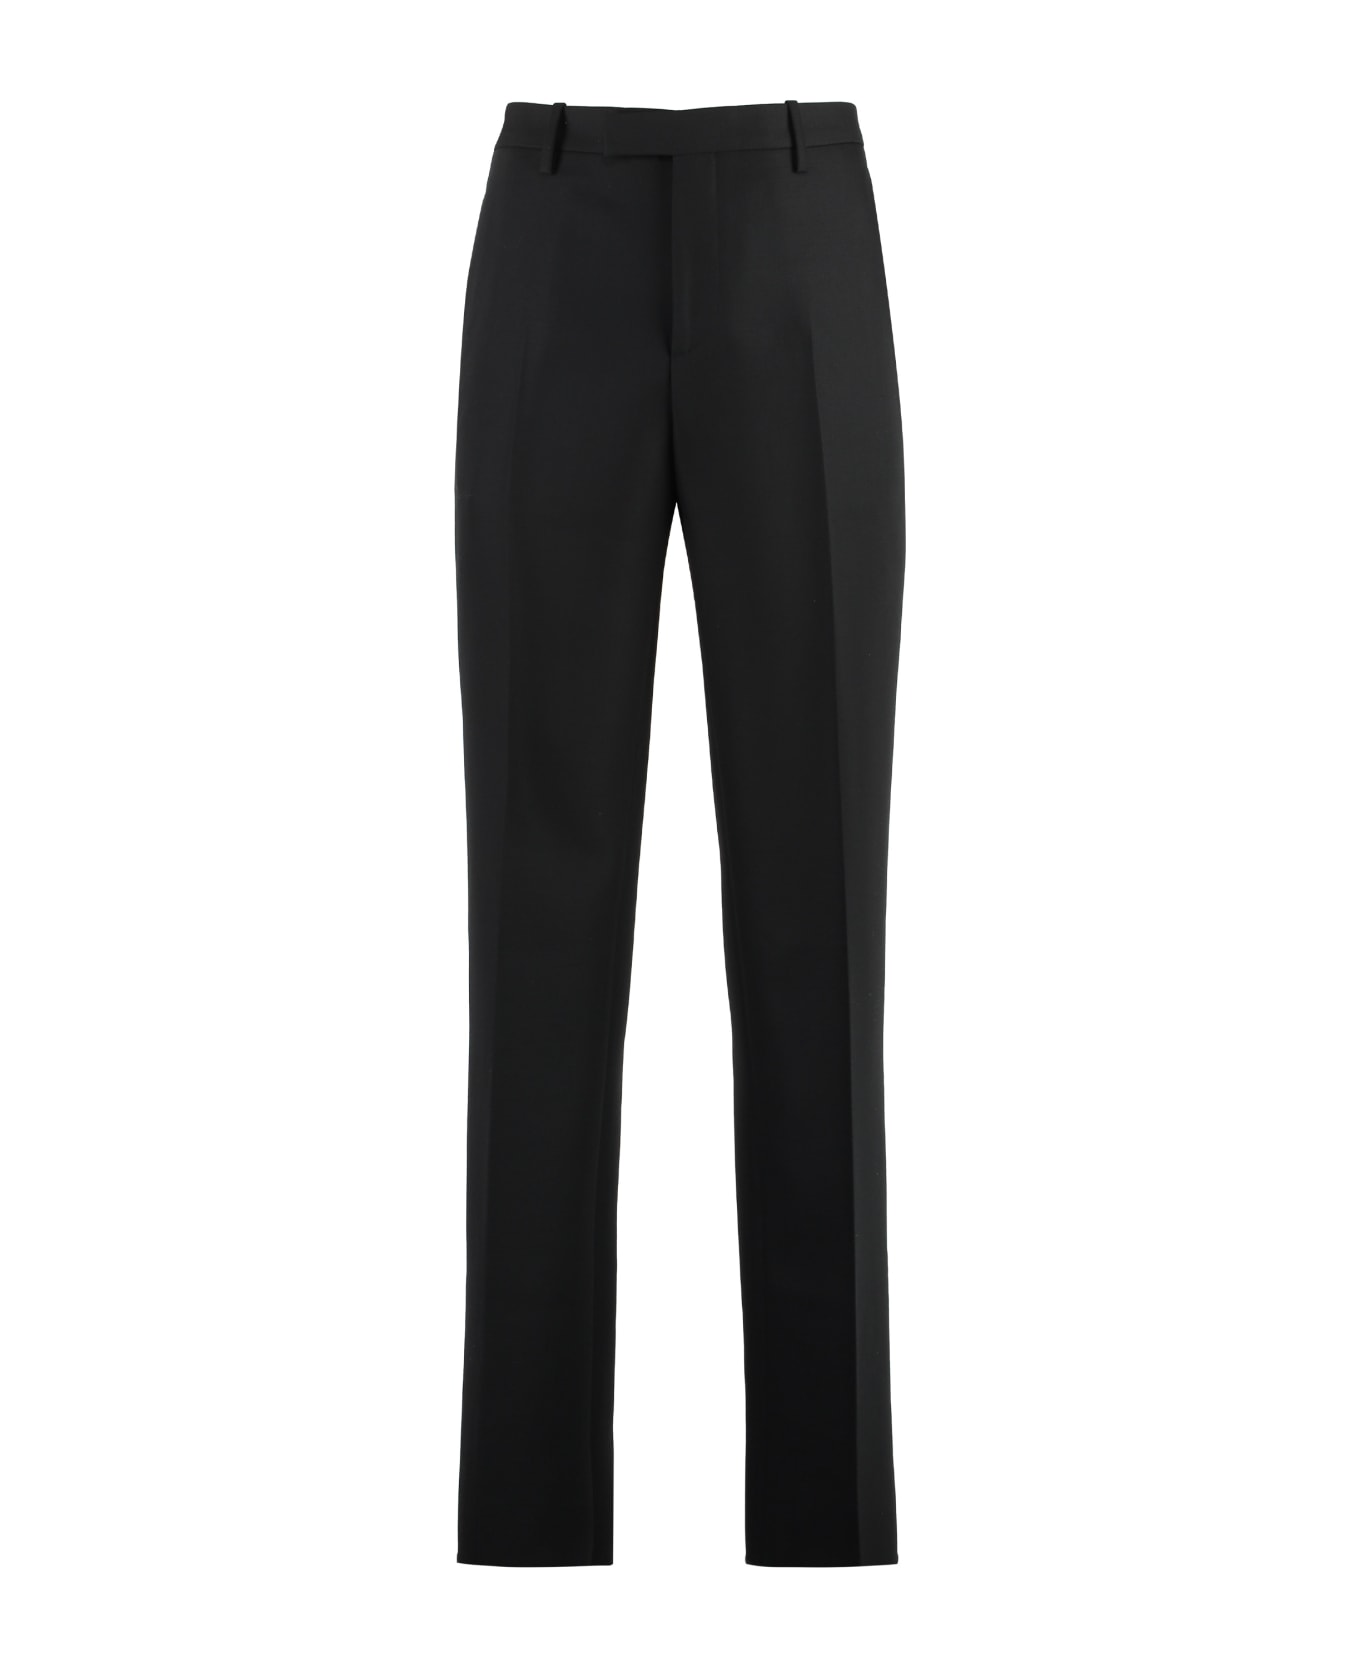 Off-White Wool Tailored Trousers - black ボトムス